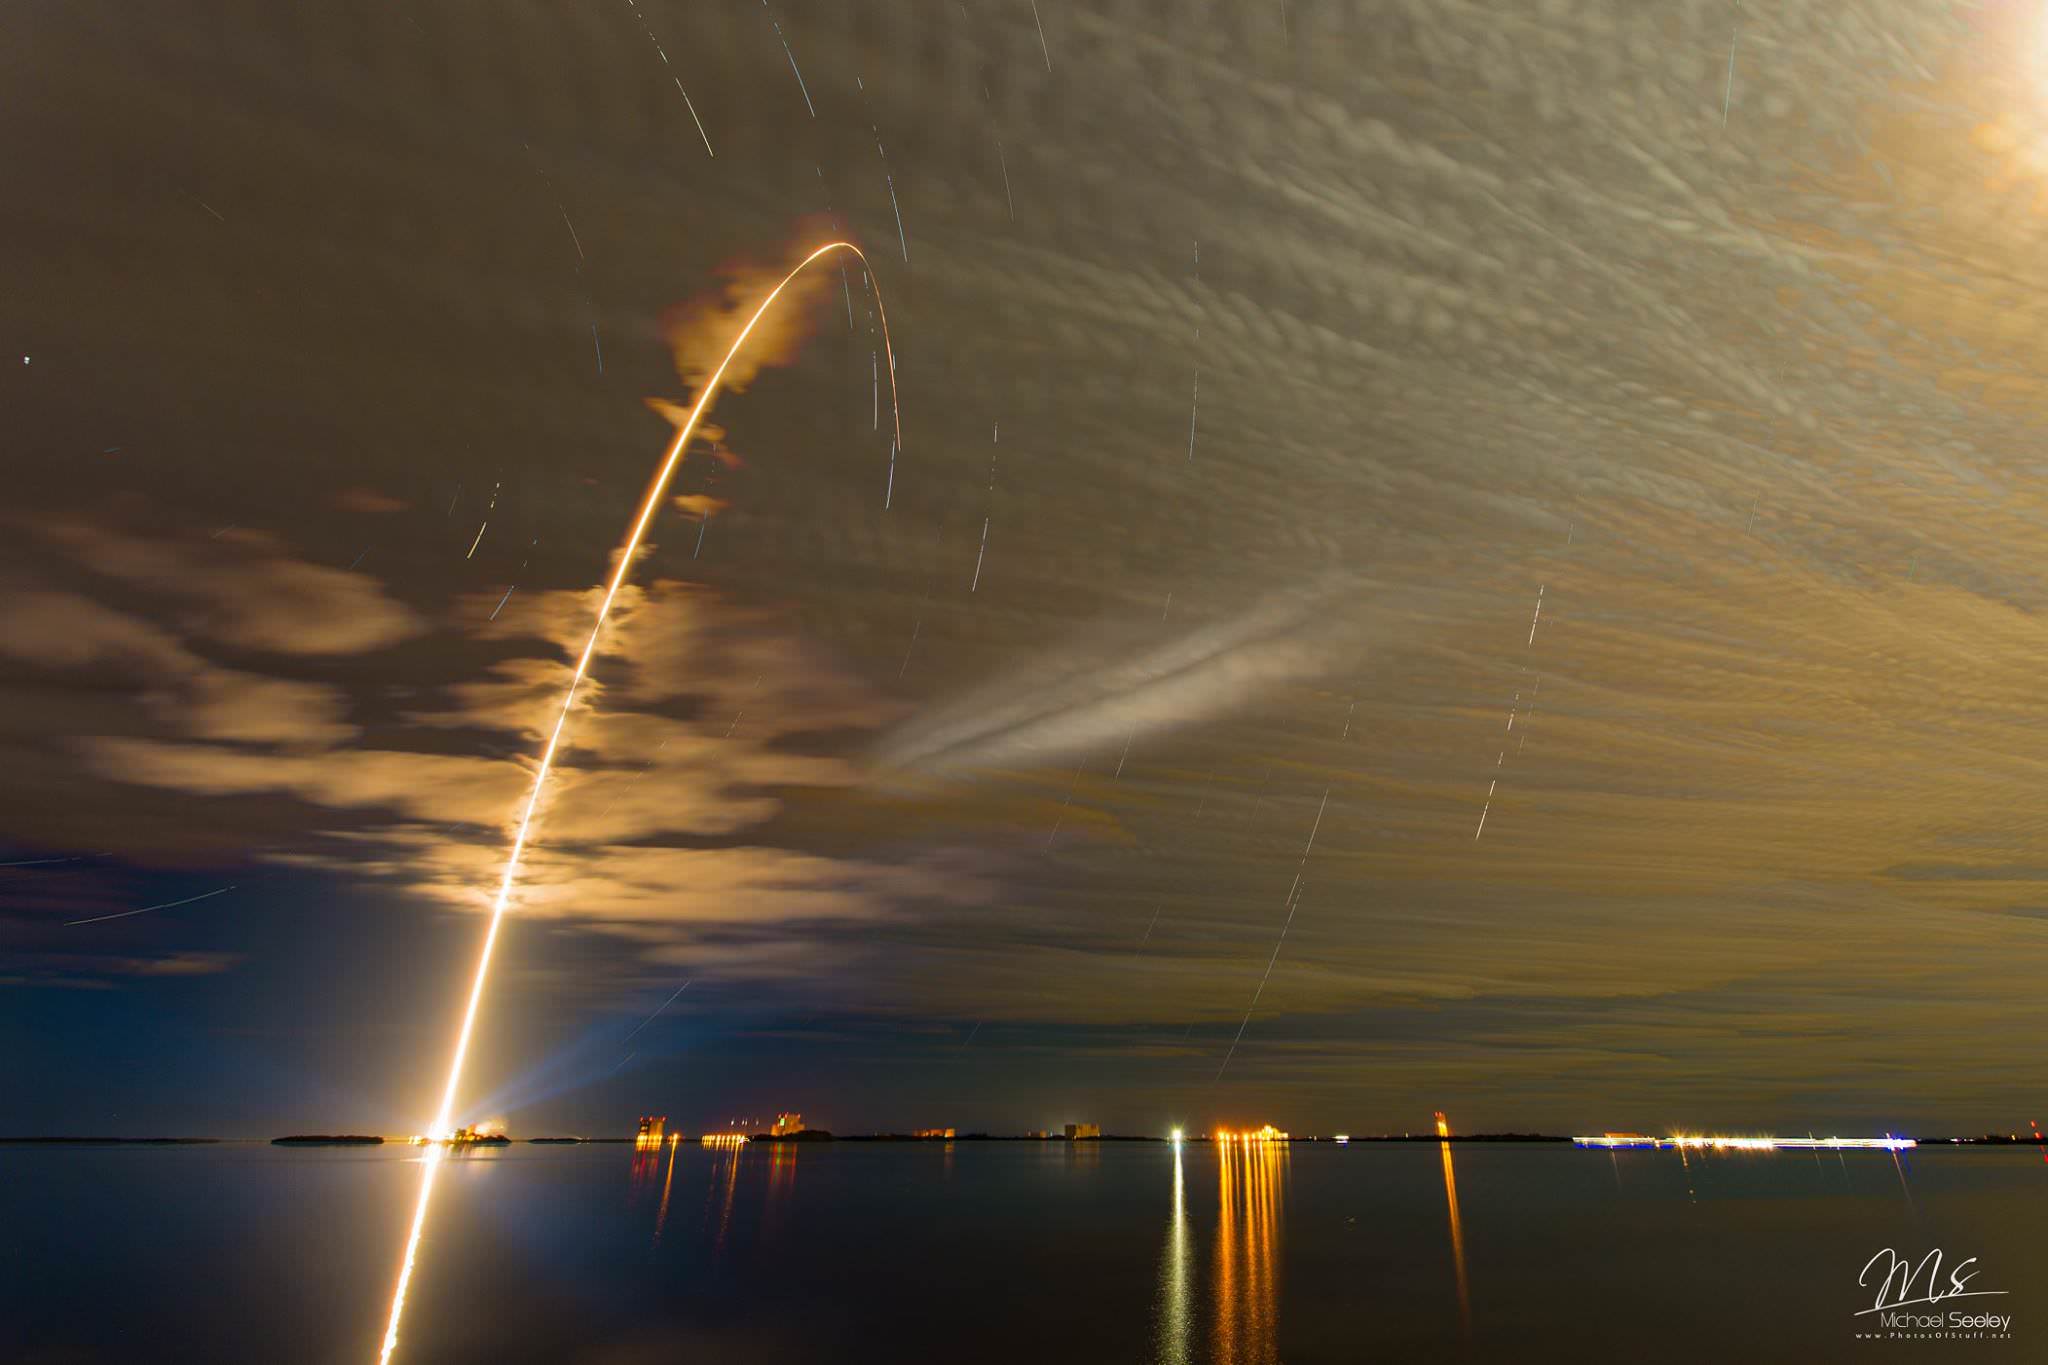 This ‘Frankenstein’ liftoff image is the result of a 160+ image time lapse sequence compiled from Atlas V rocket launch carrying the OA-6 ISS resupply #Cygnus capsule,  showing streak shot and star trails as captured at the NASA causeway at KSC/CCAFS. Launched by United Launch Alliance for Orbital ATK on March 22, 2016 at 11:05 p.m. EDT.  Credit: Mike Seeley